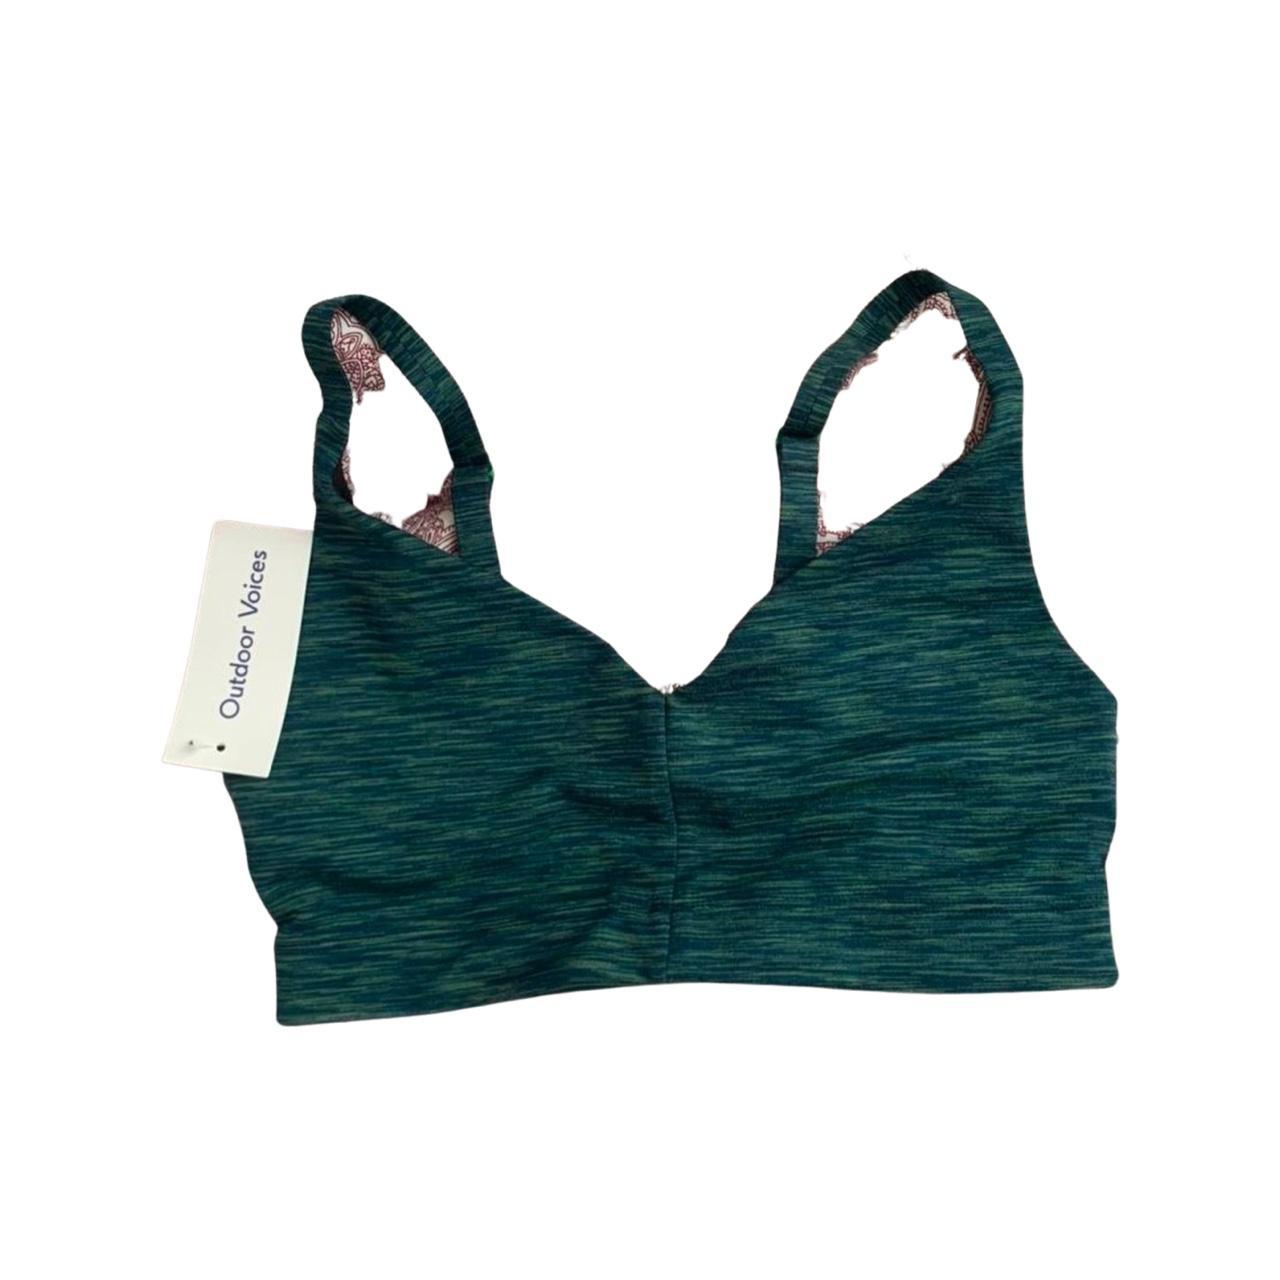 Outdoor Voices Freeform Flow bra. This is a low - Depop